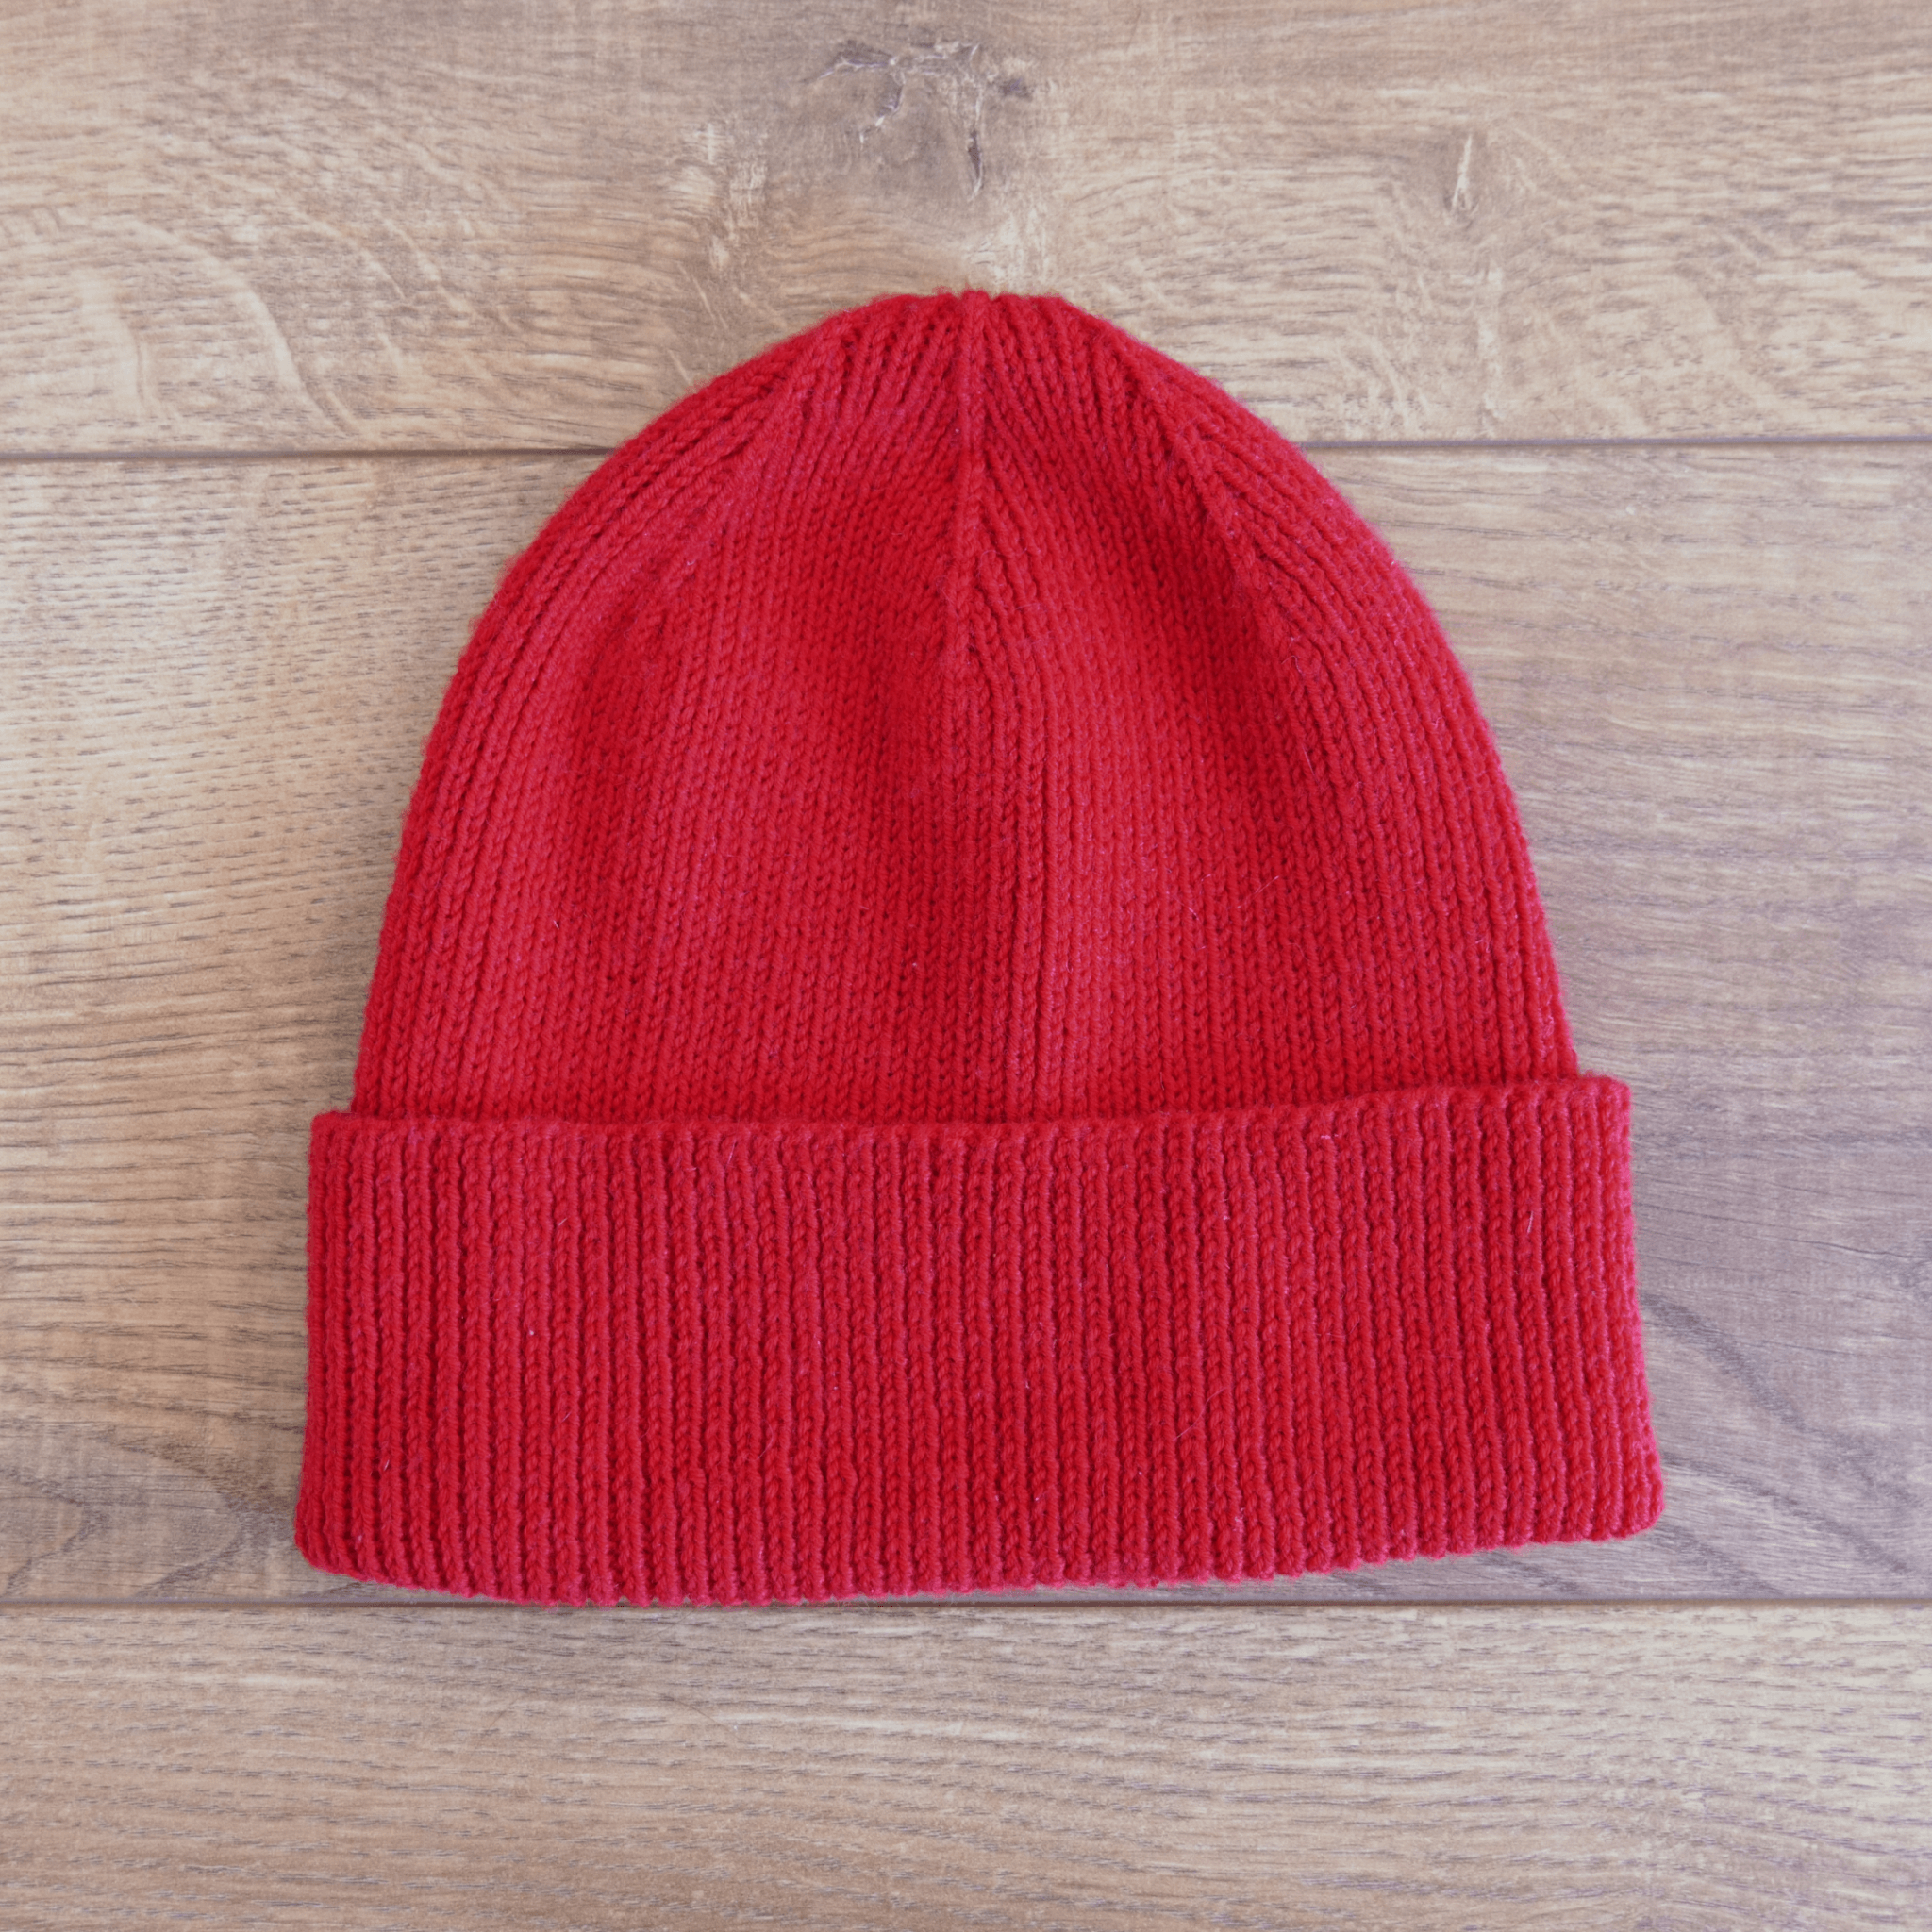 Bright red knit beanie laying flat on a wood floor